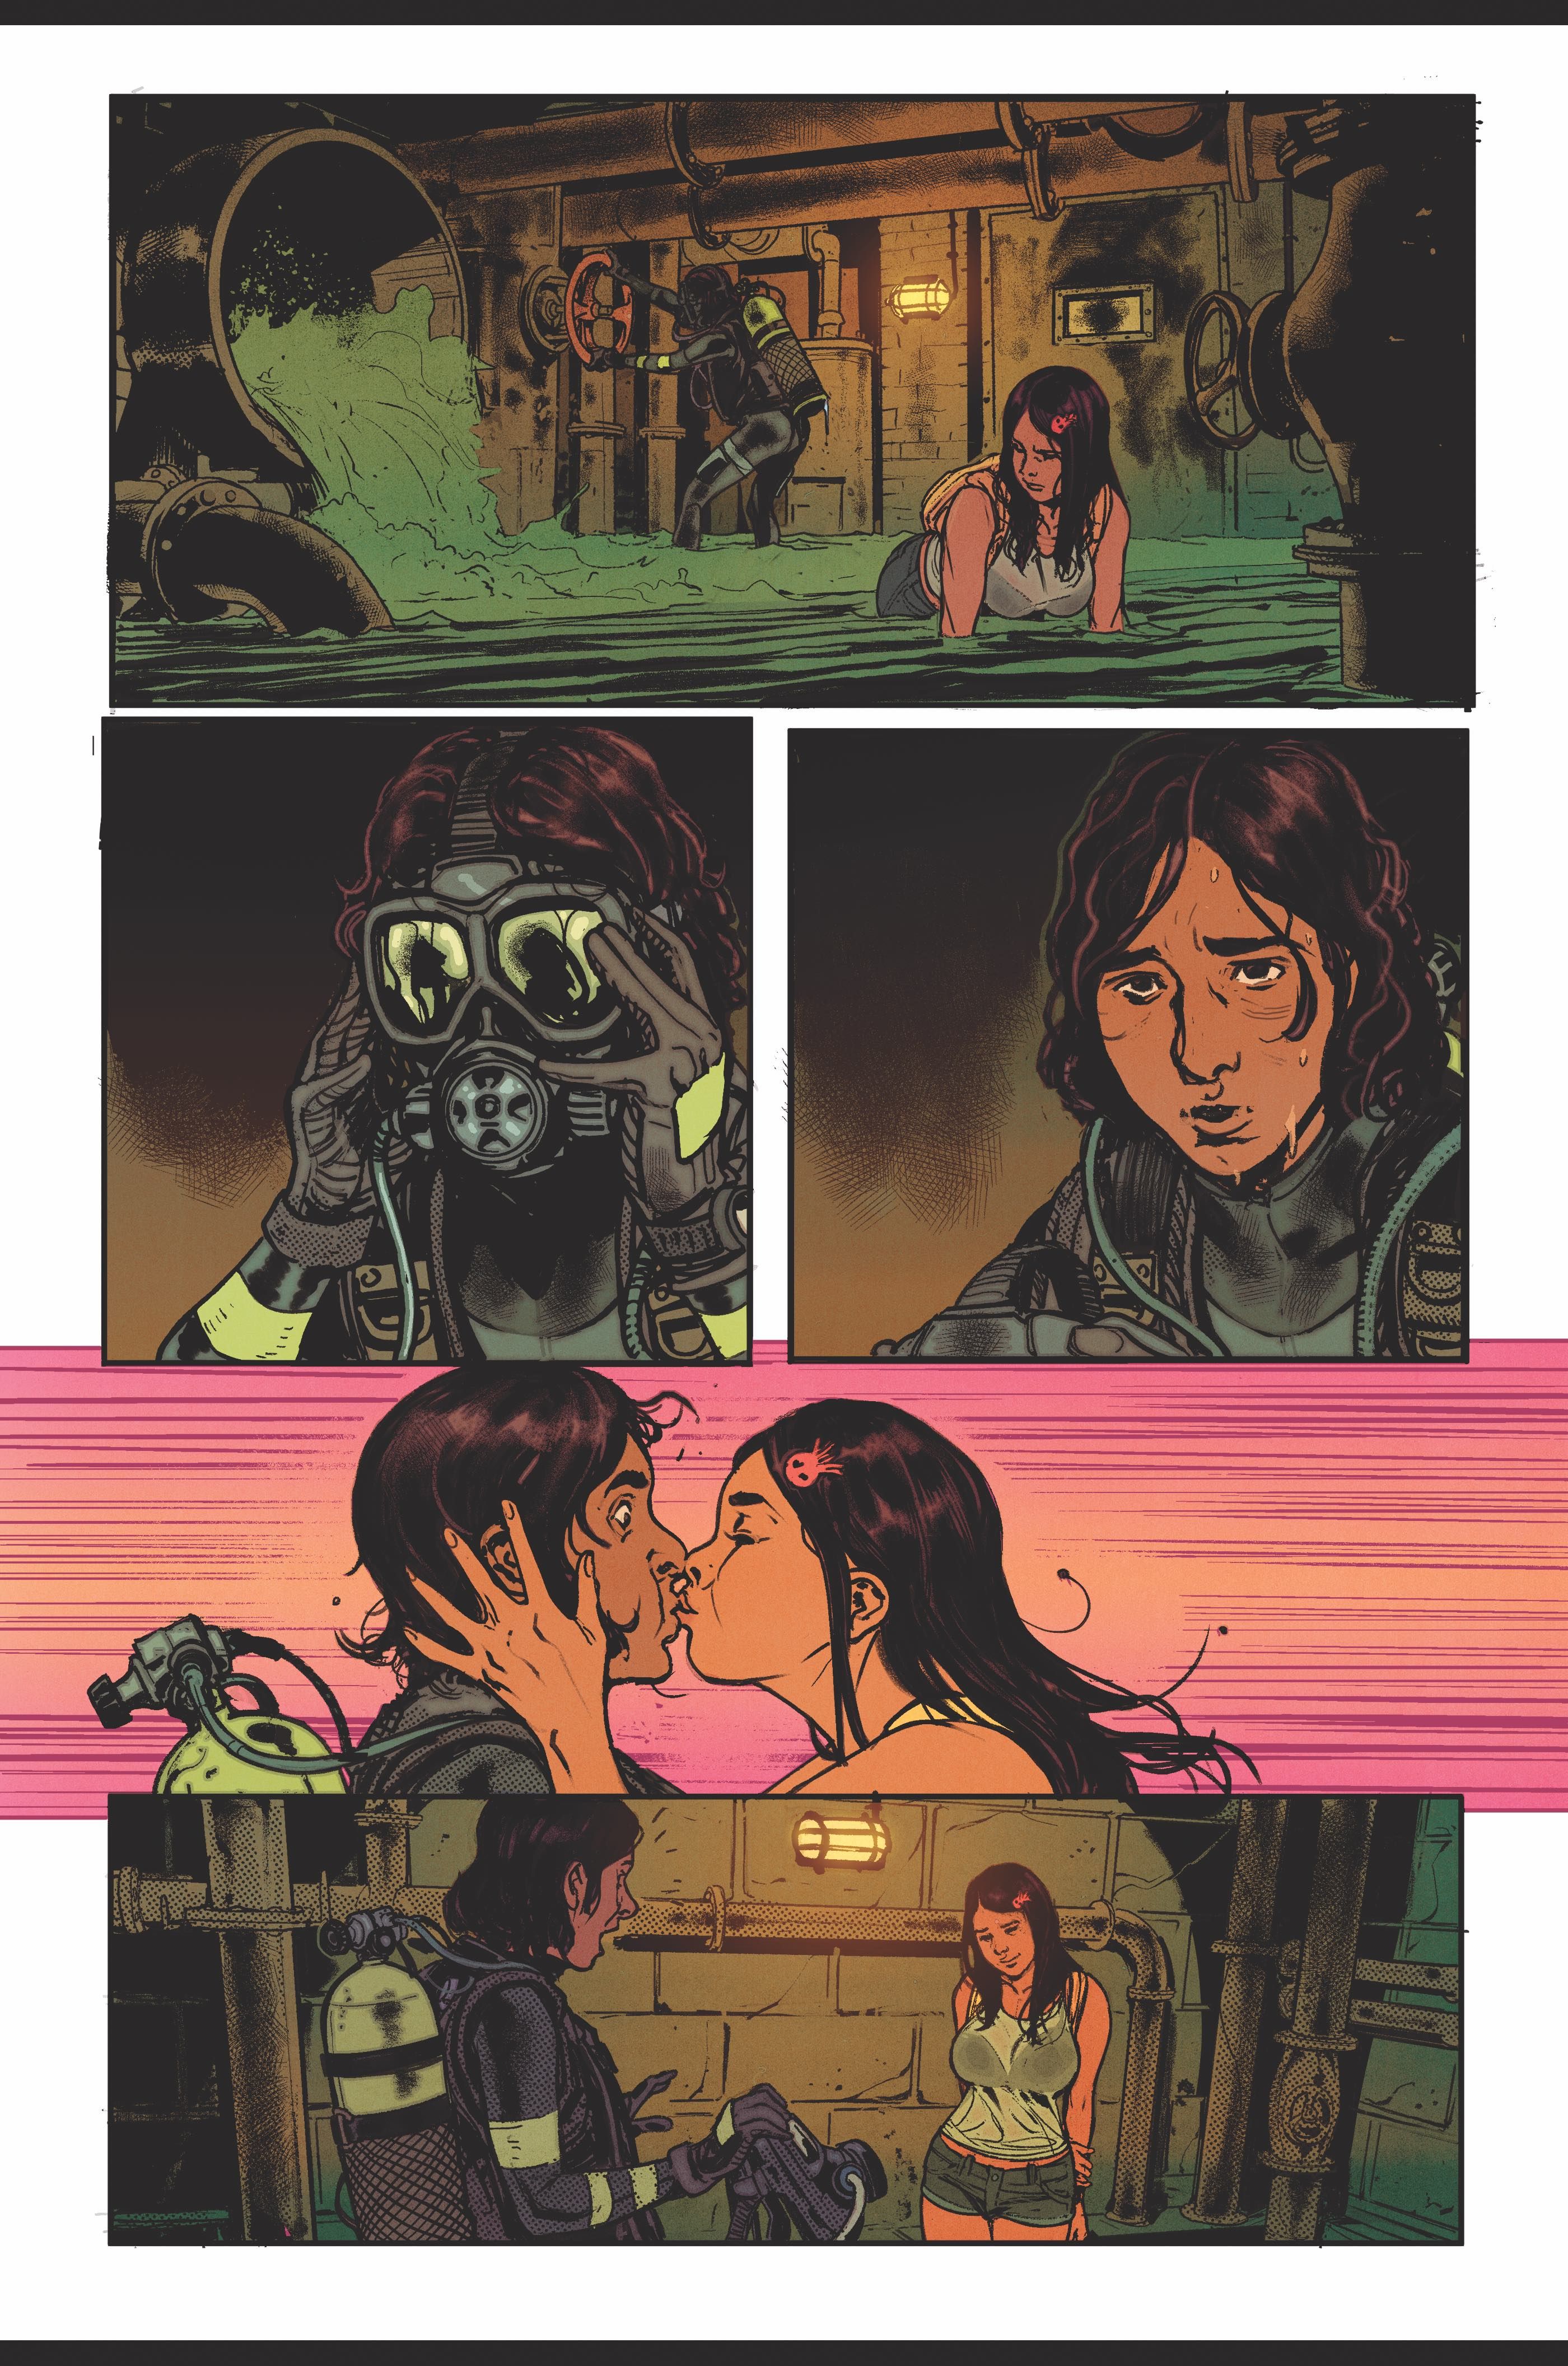 EXCLUSIVE: Vault's Heart Eyes Mixes Romances and Lovecraftian Horror in New Twisted Tale